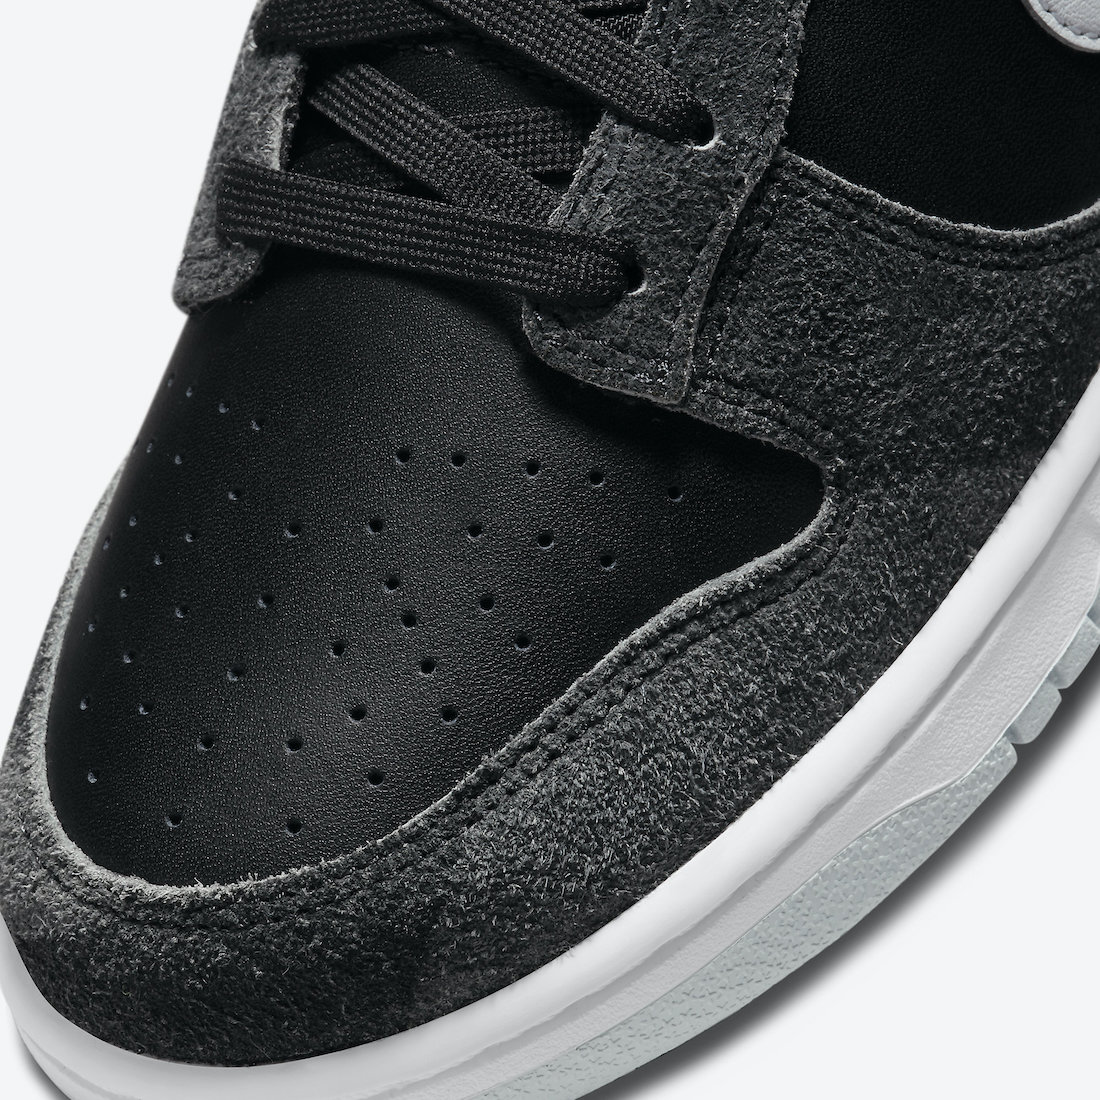 Nike Dunk Low Animal Black DH7913-001 Release Date